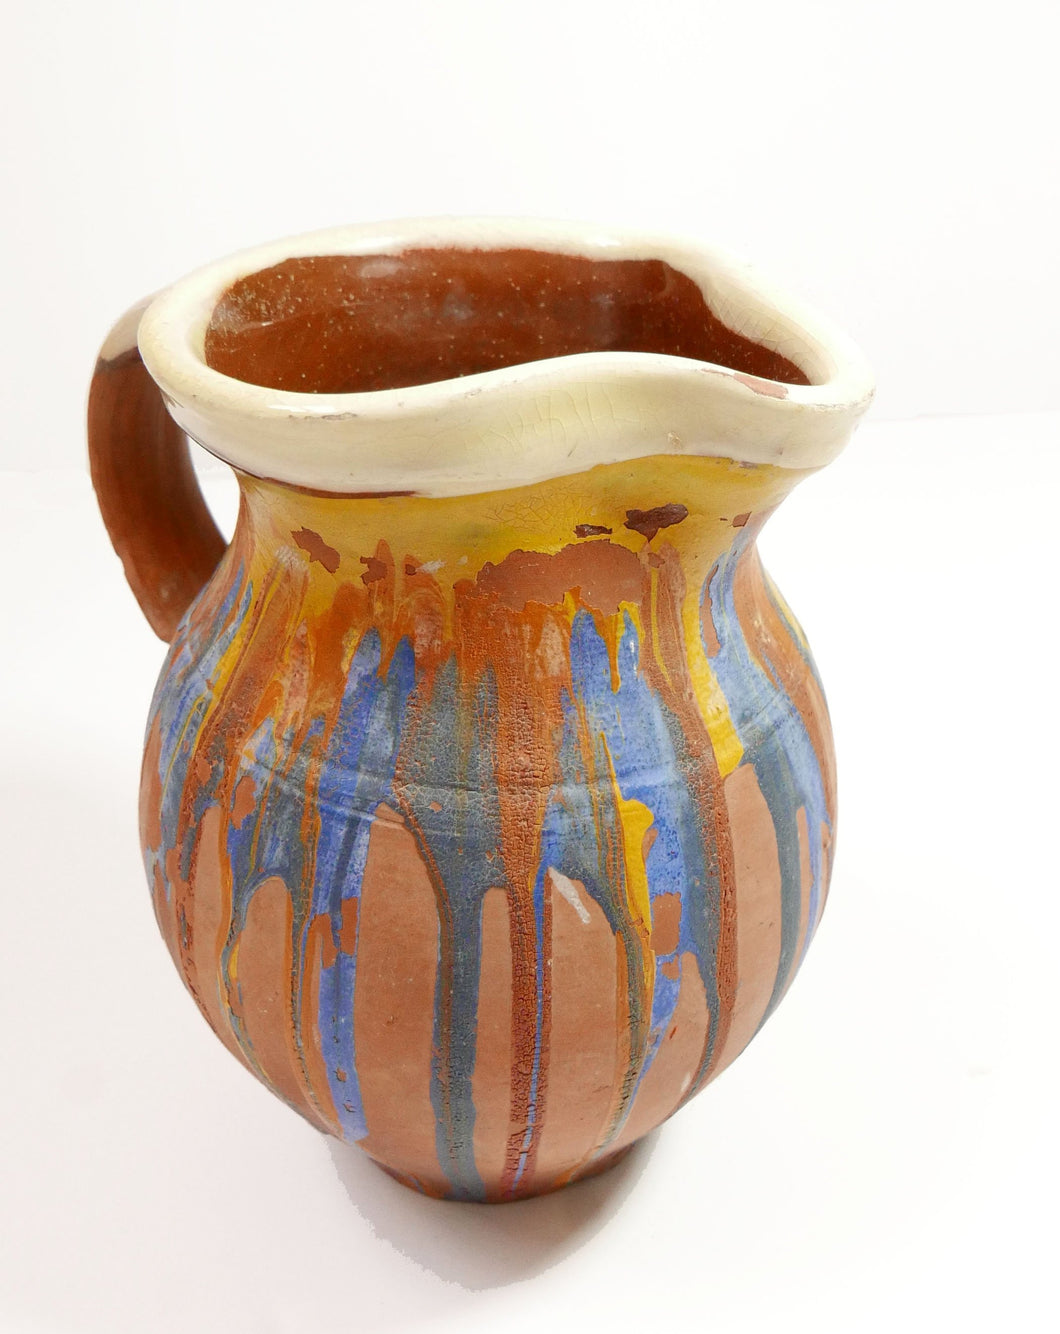 Vintage hand painted Jug with blue yellow and orange paint 